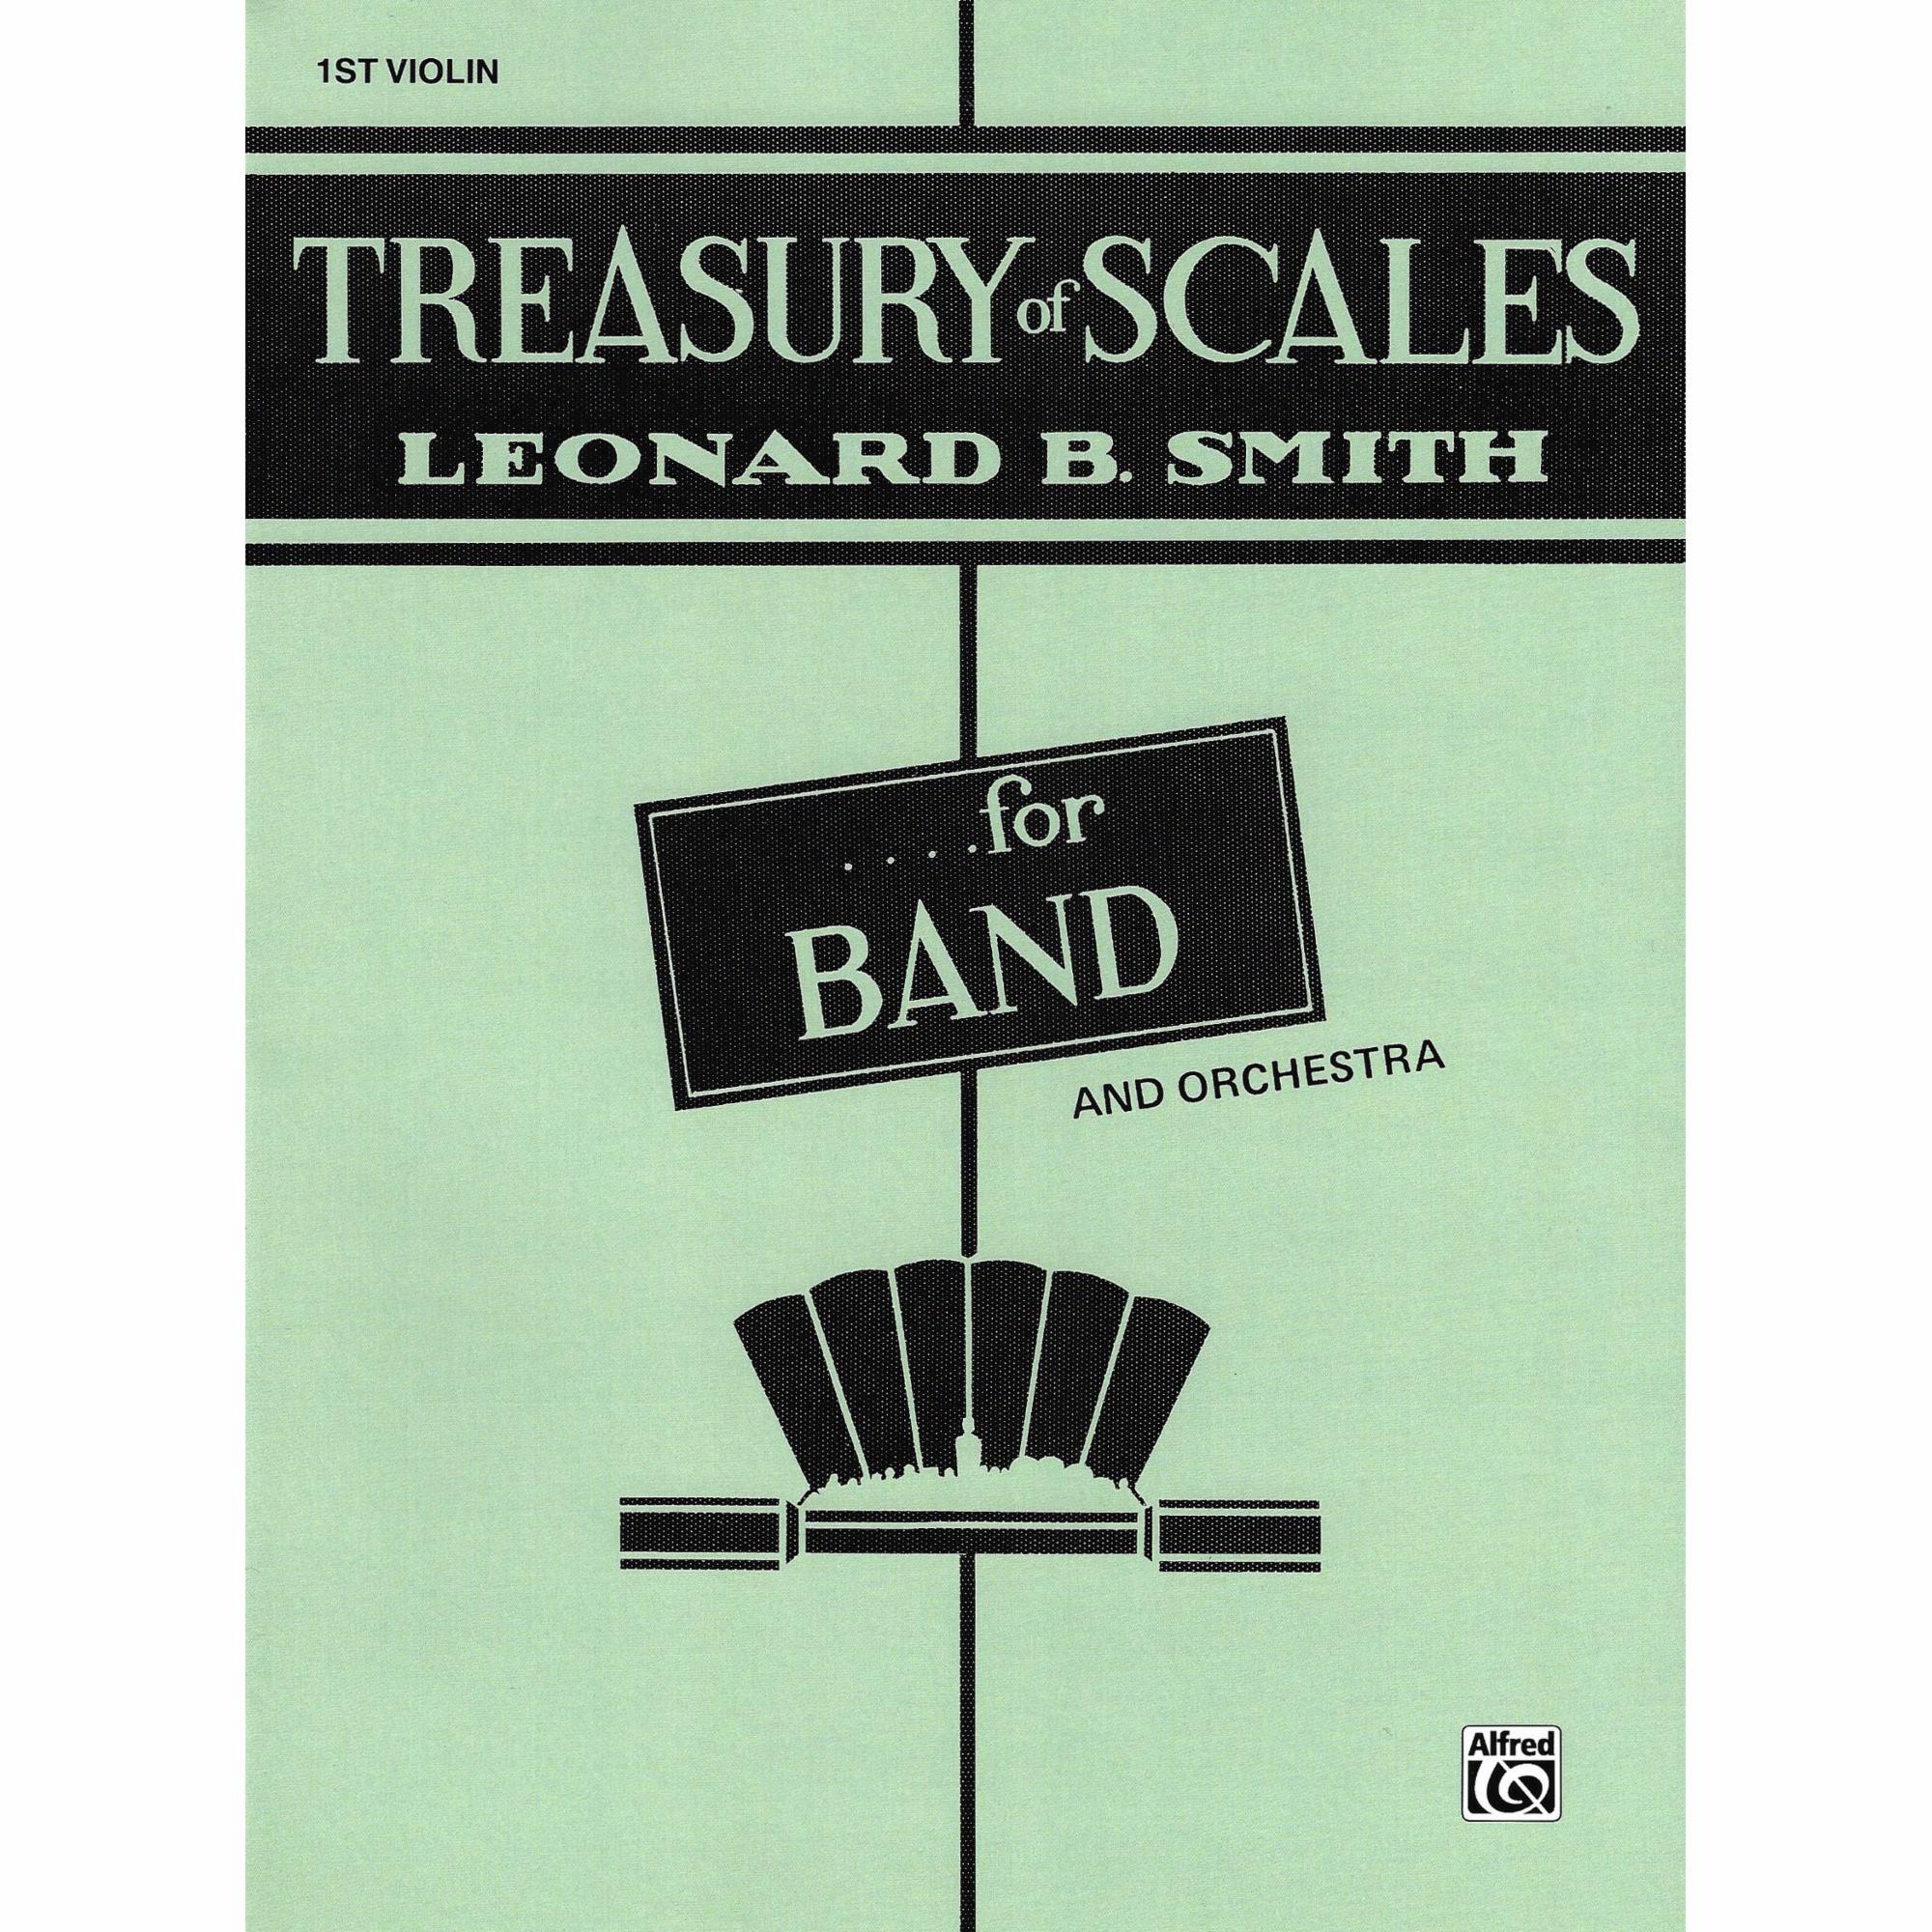 A Treasury of Scales for Strings